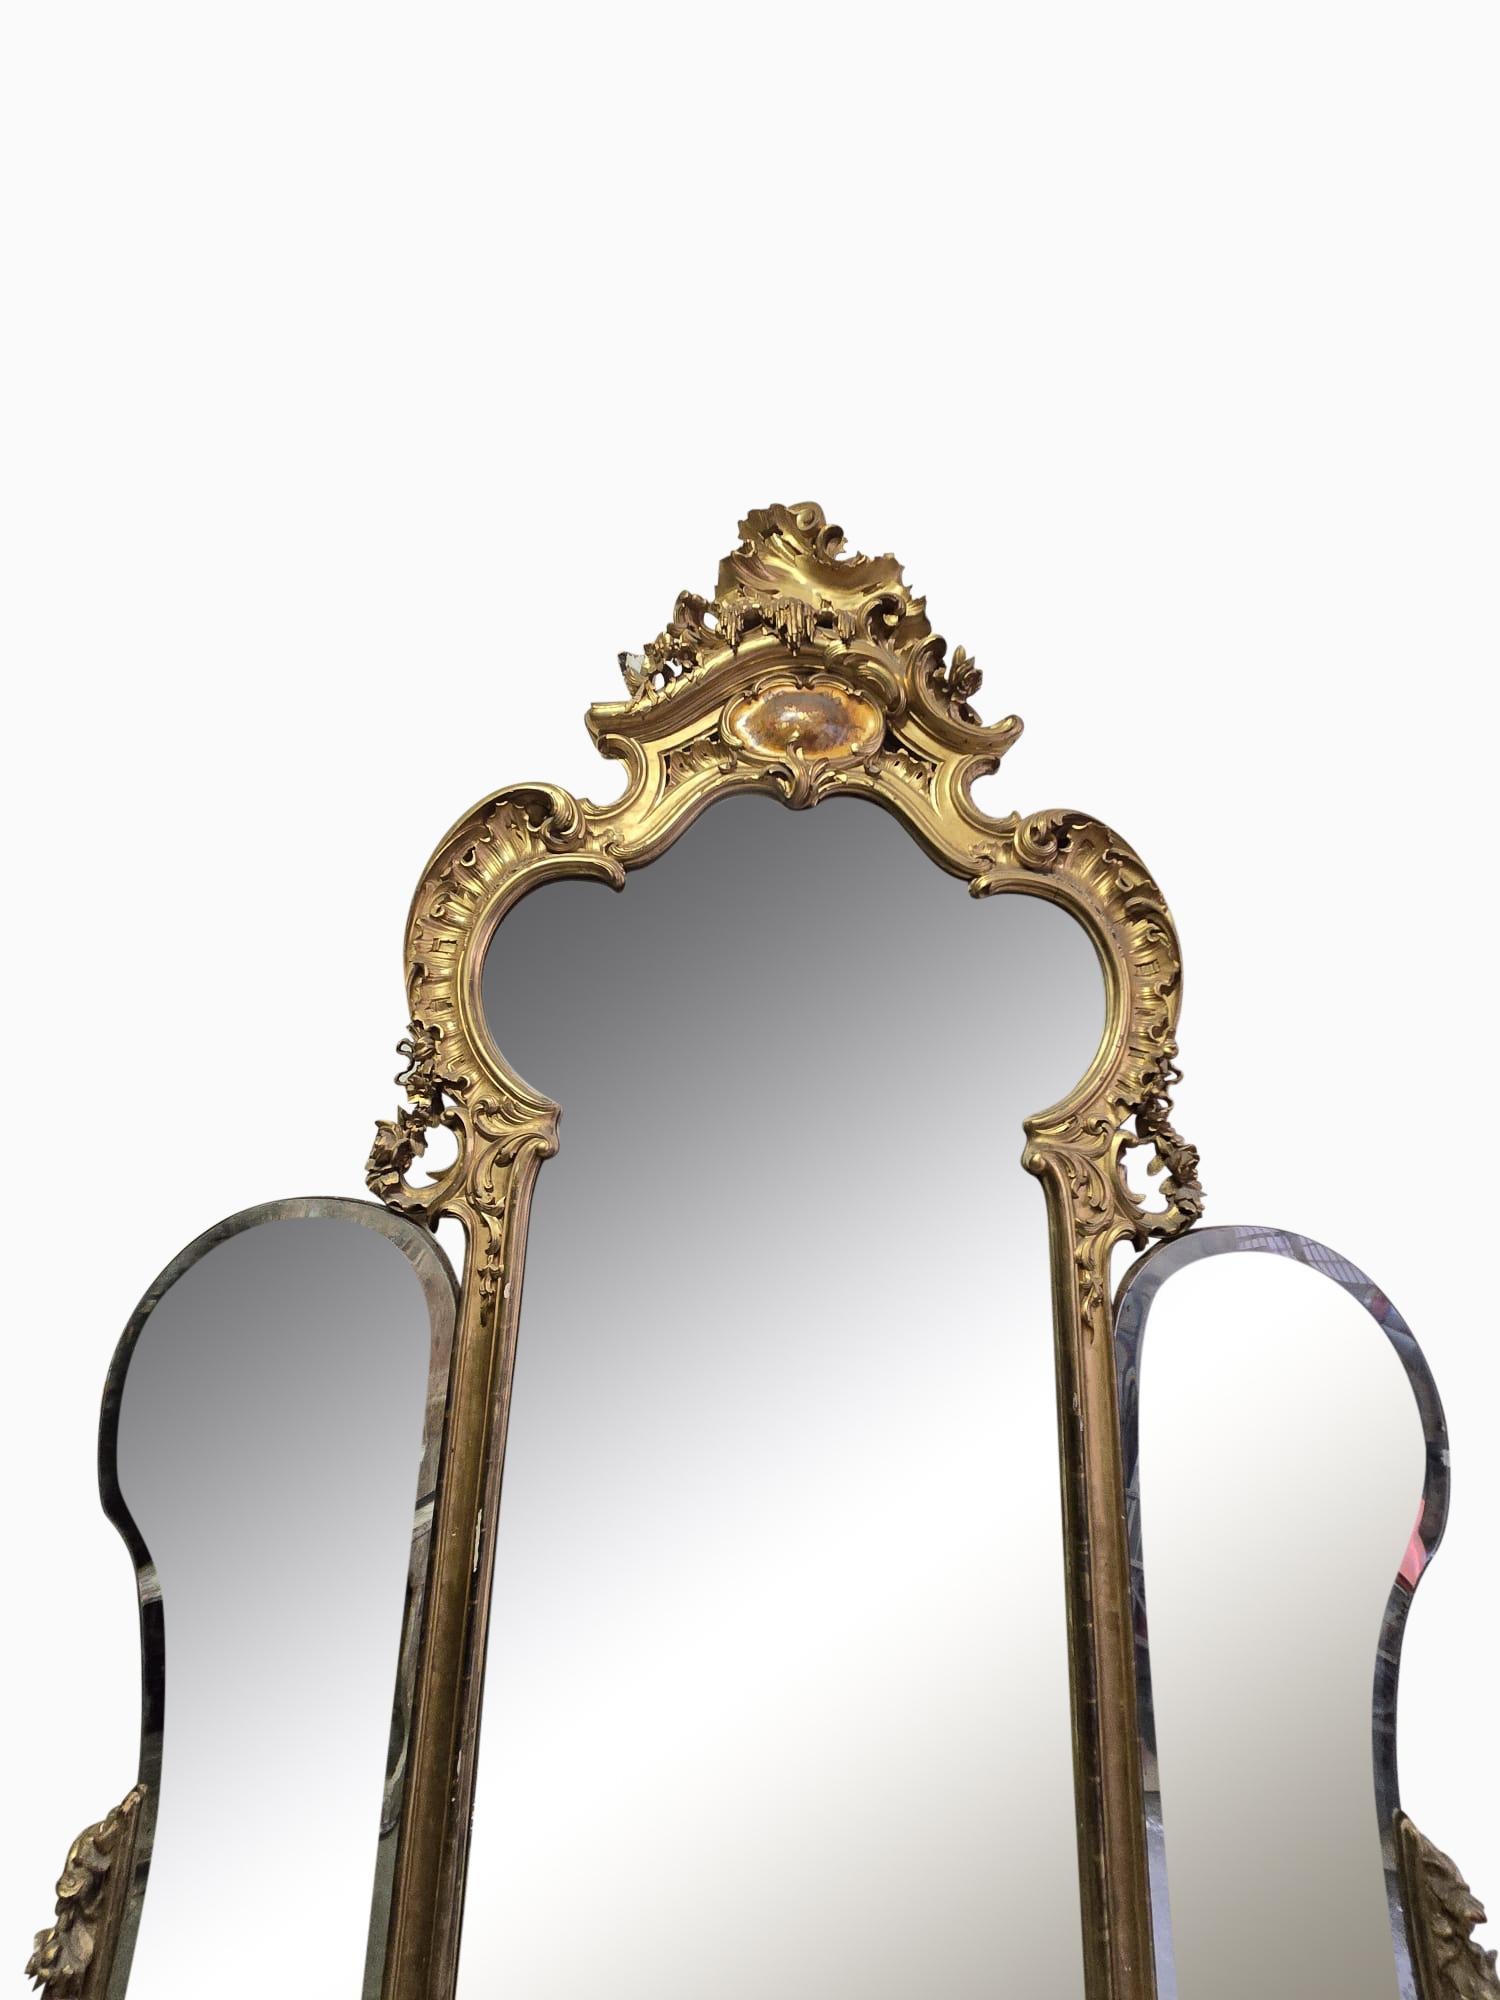 Immerse yourself in the elegance of the 19th century with our monumental French gilded wood mirror. Measuring 300x170 cm, this mirror transcends mere decor; it's a statement piece that exudes history and sophistication.

The gilded wood frame is